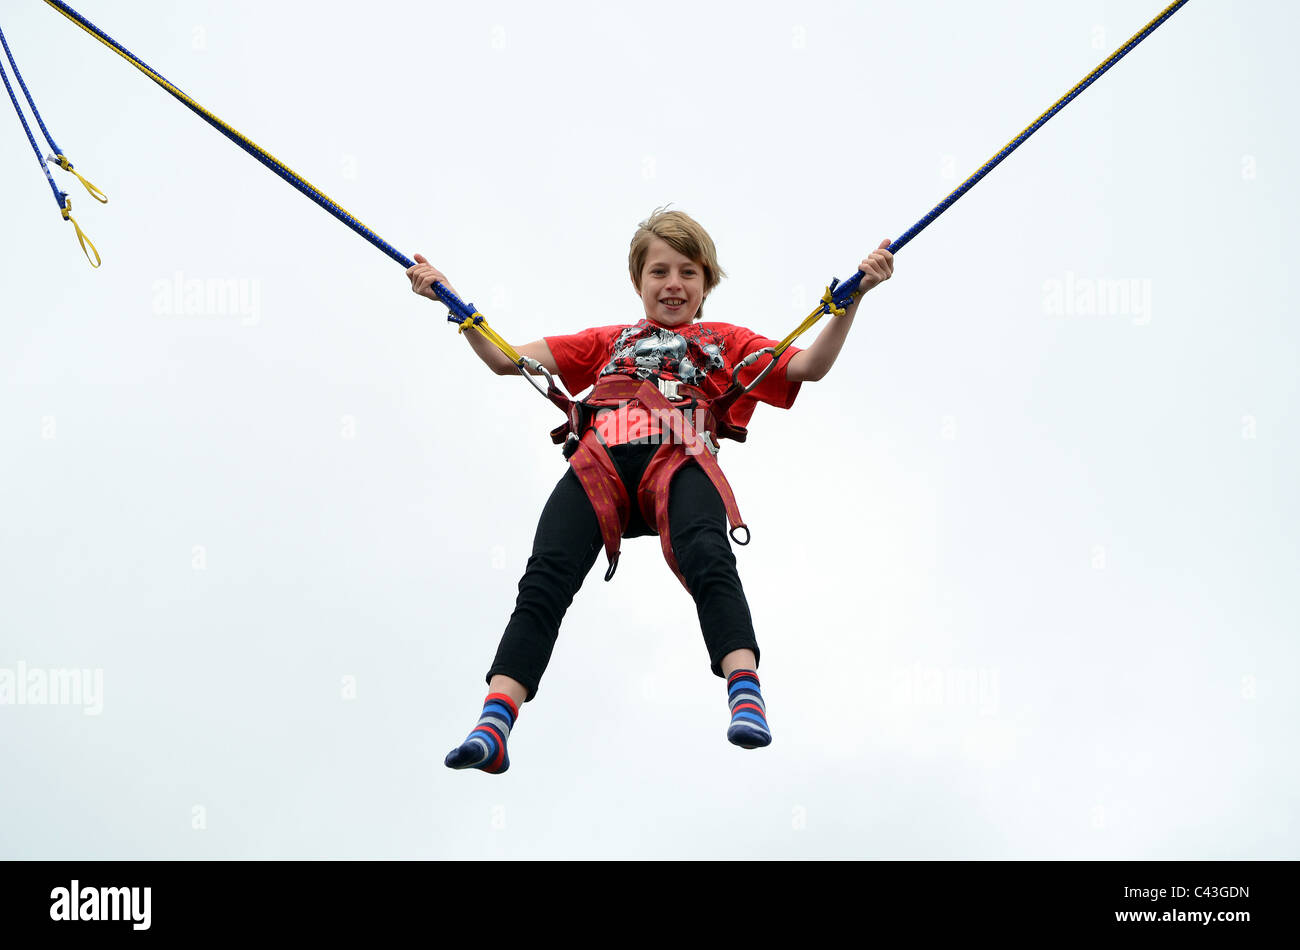 a young boy on a bungee trampoline Stock Photo